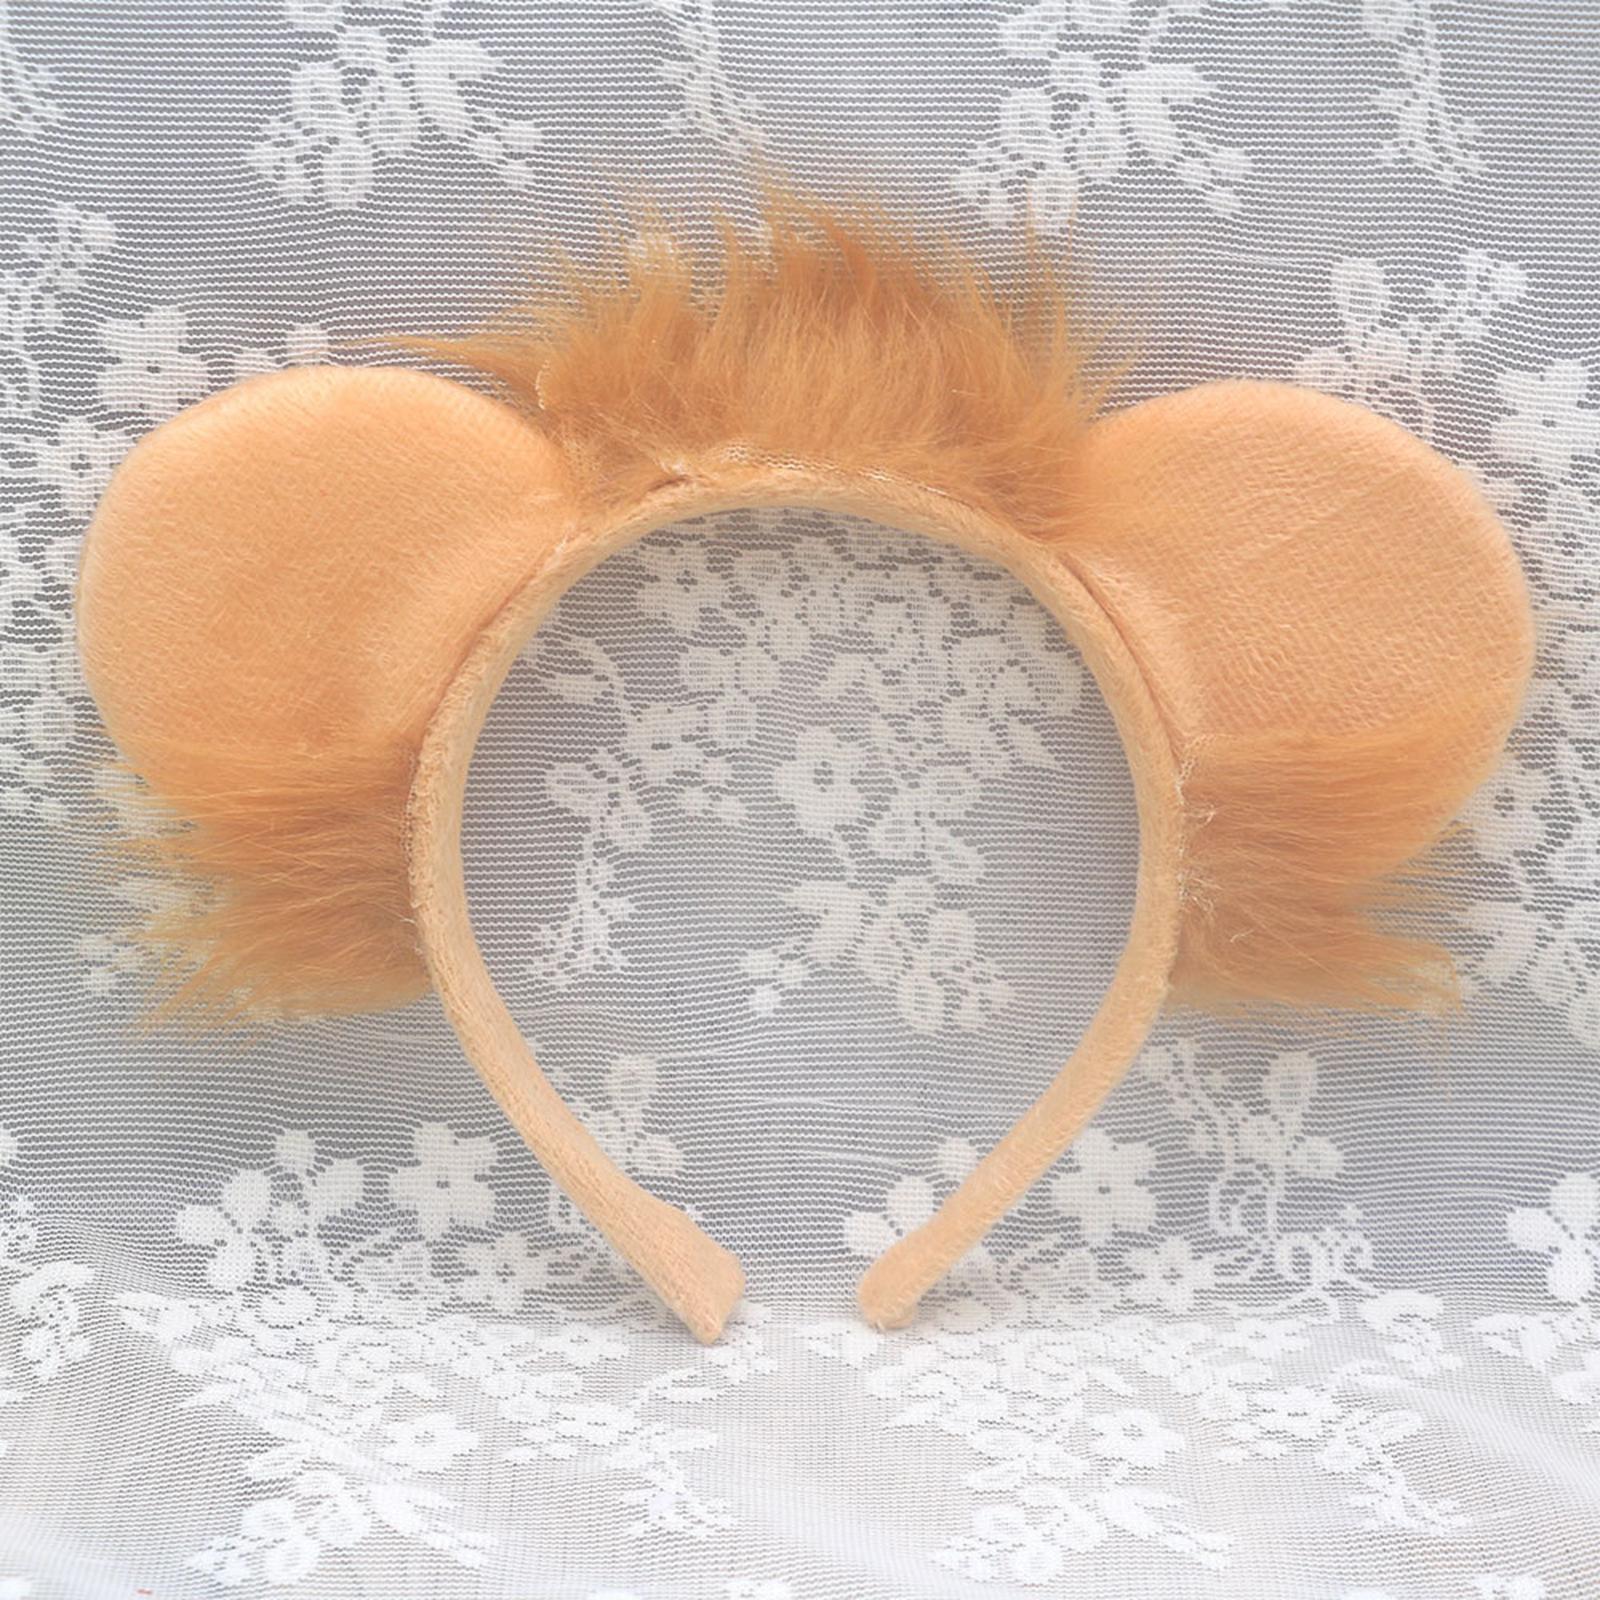 Lion Tail Ears Costume Set Headdress Cosplay Kids Adults Props Bow Tie Gloves Headband for Stage Performance Halloween Animal Themed Parties